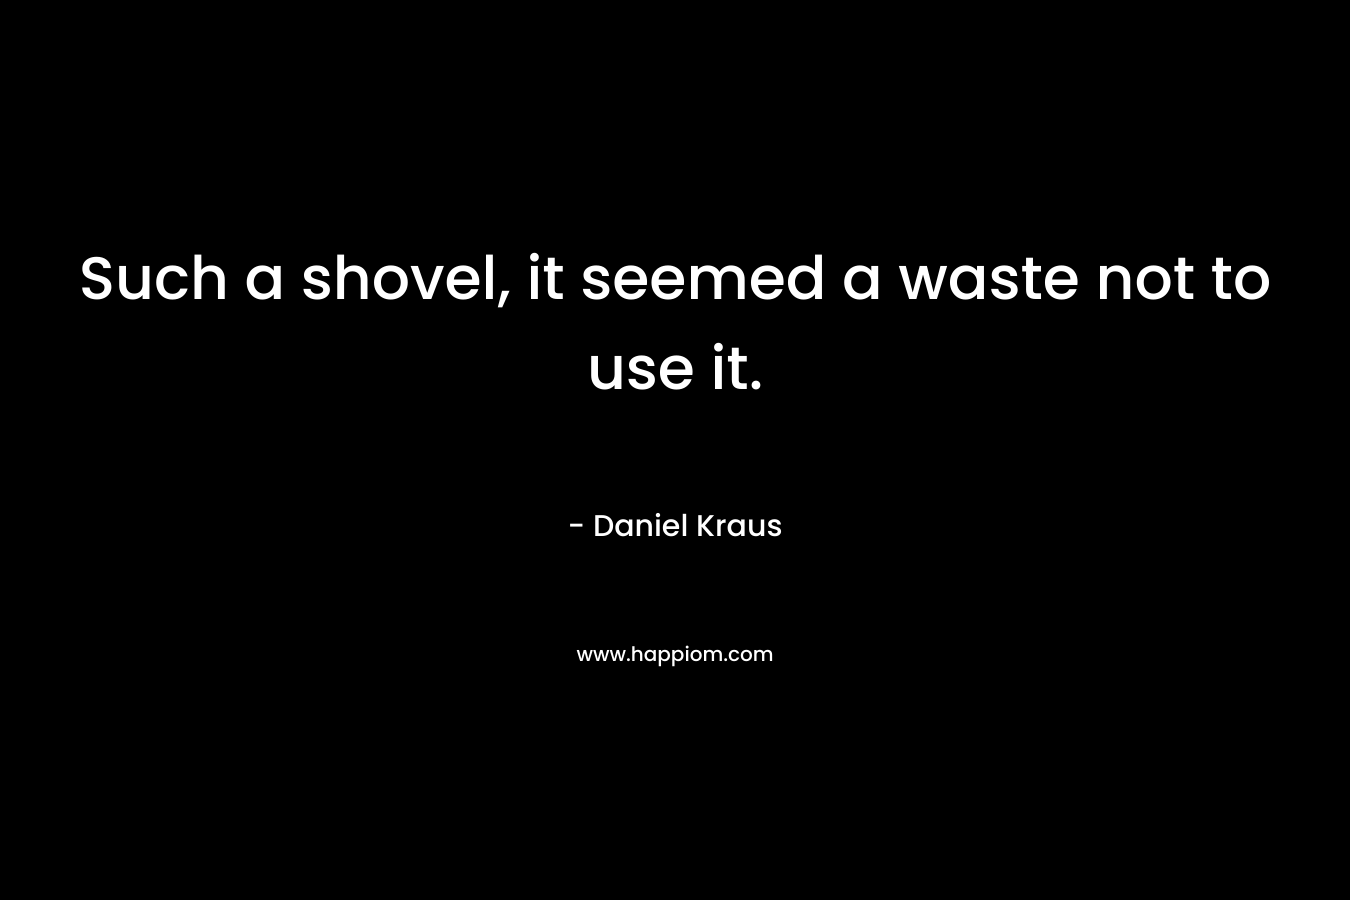 Such a shovel, it seemed a waste not to use it. – Daniel Kraus